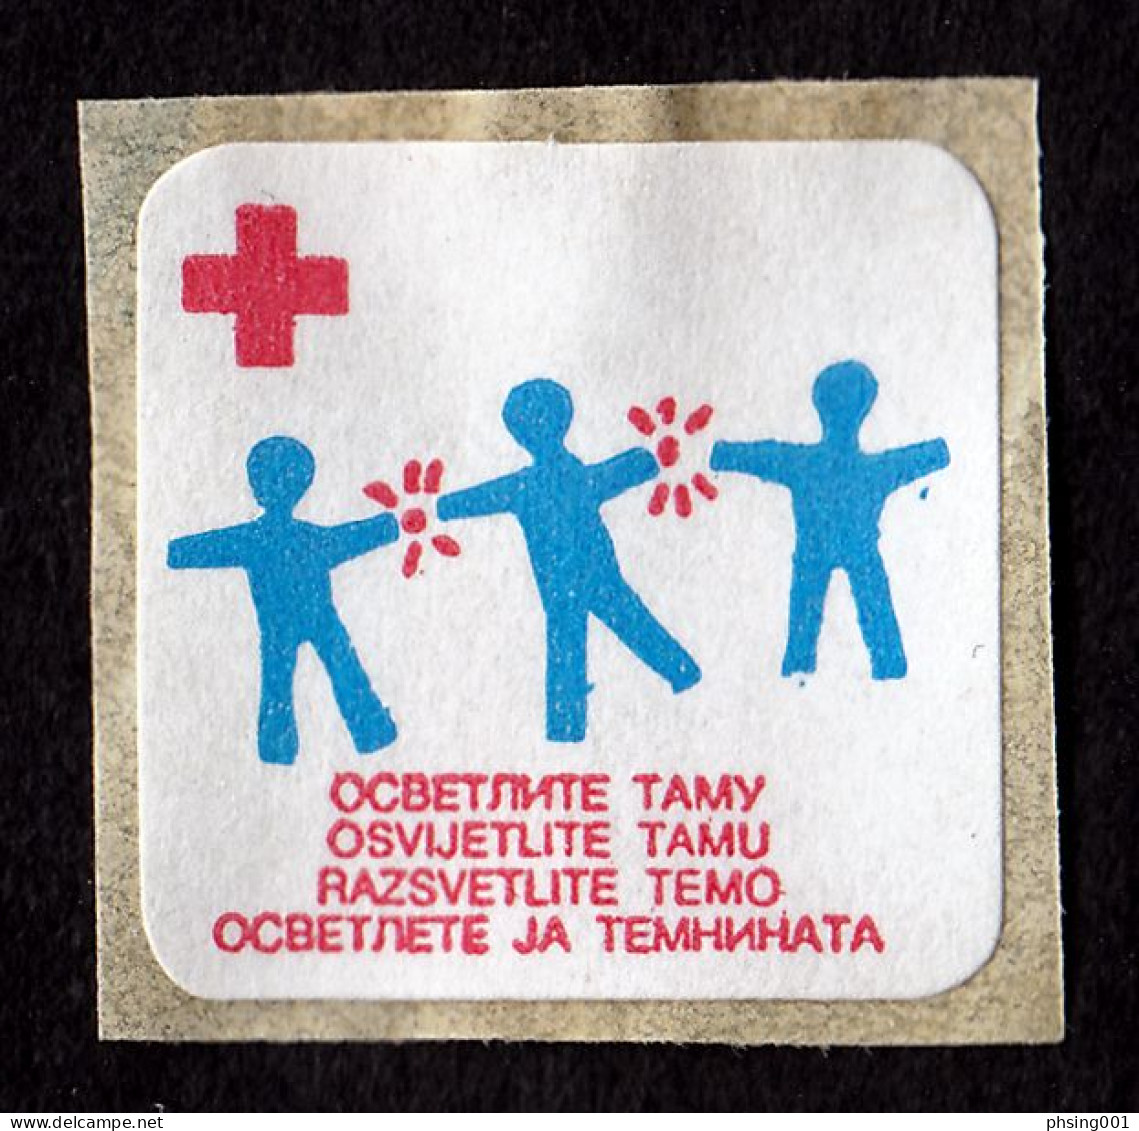 Yugoslavia 1991 Red Cross Croix Rouge Rotes Kreuz Tax Charity Surcharge Self Adhesive Stamp MNH - Postage Due